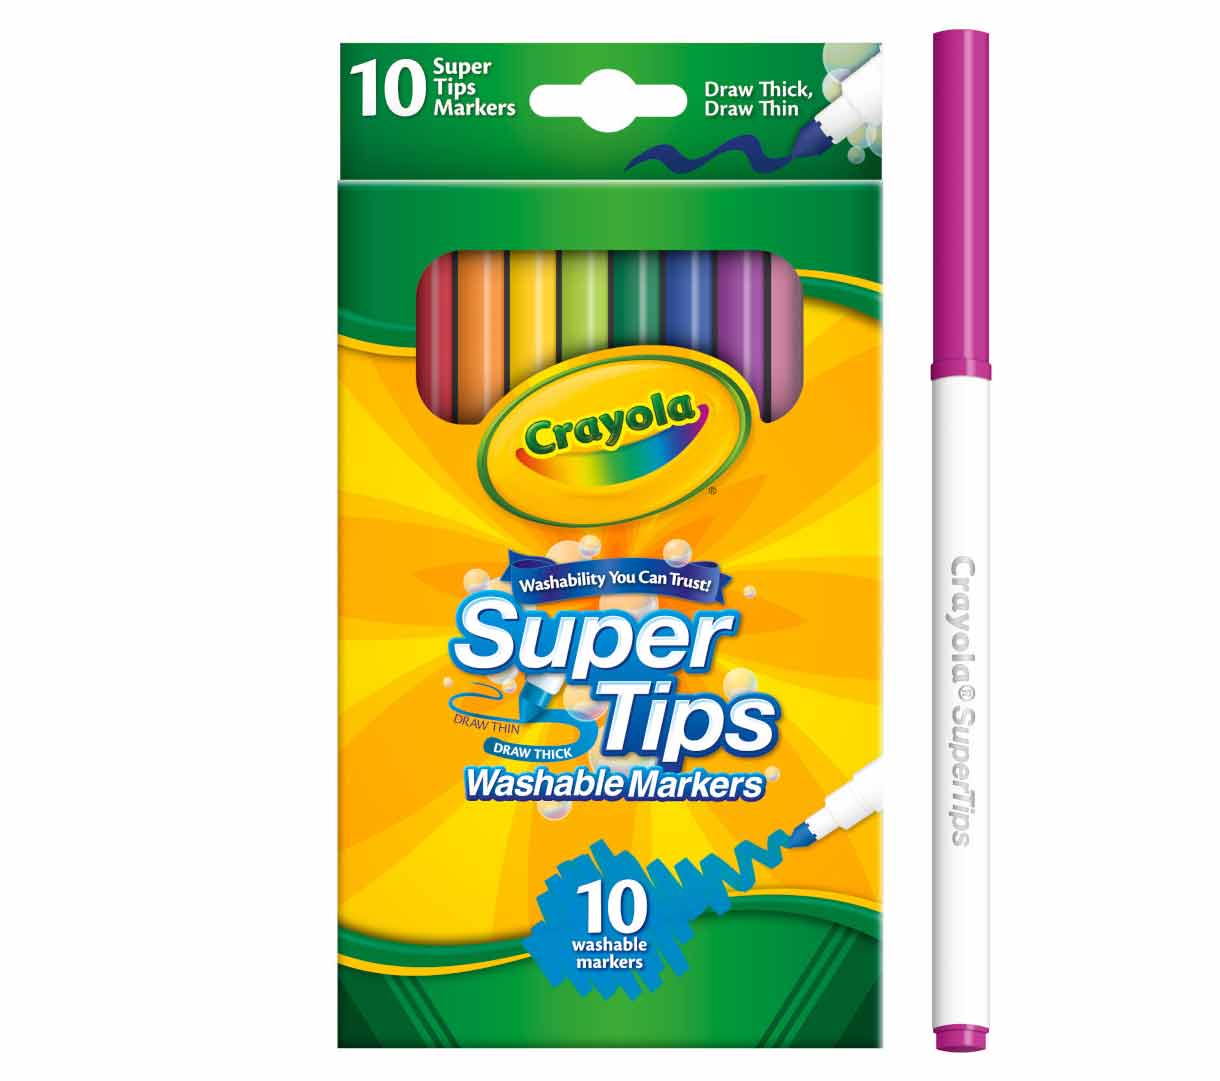 WASHABLE SUPERTIP MARKERS 10CT